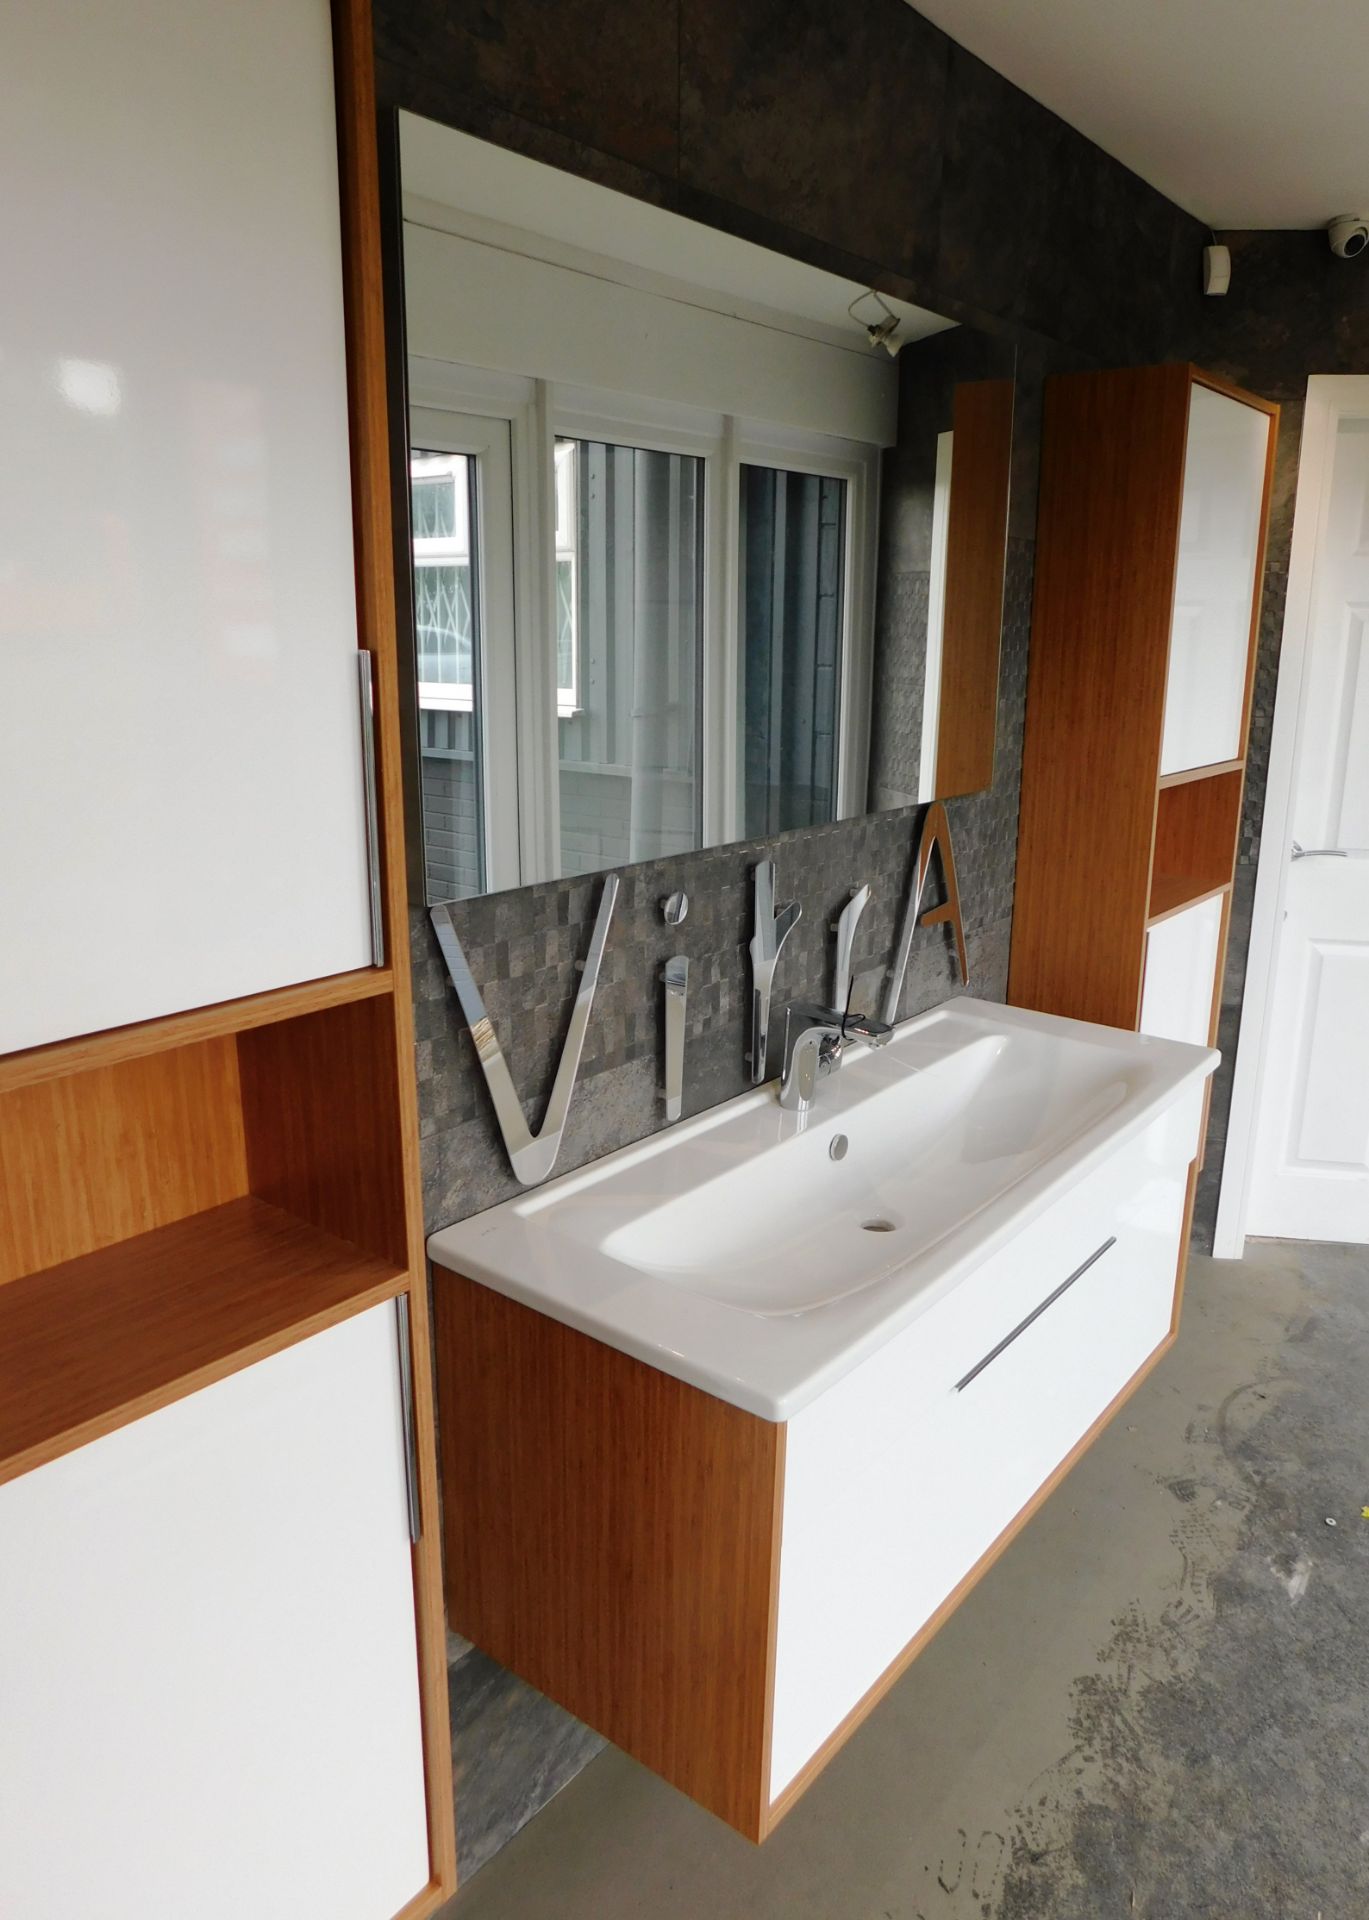 Vitra Bathroom Suite comprising Wall Mounted Sink - Image 2 of 5